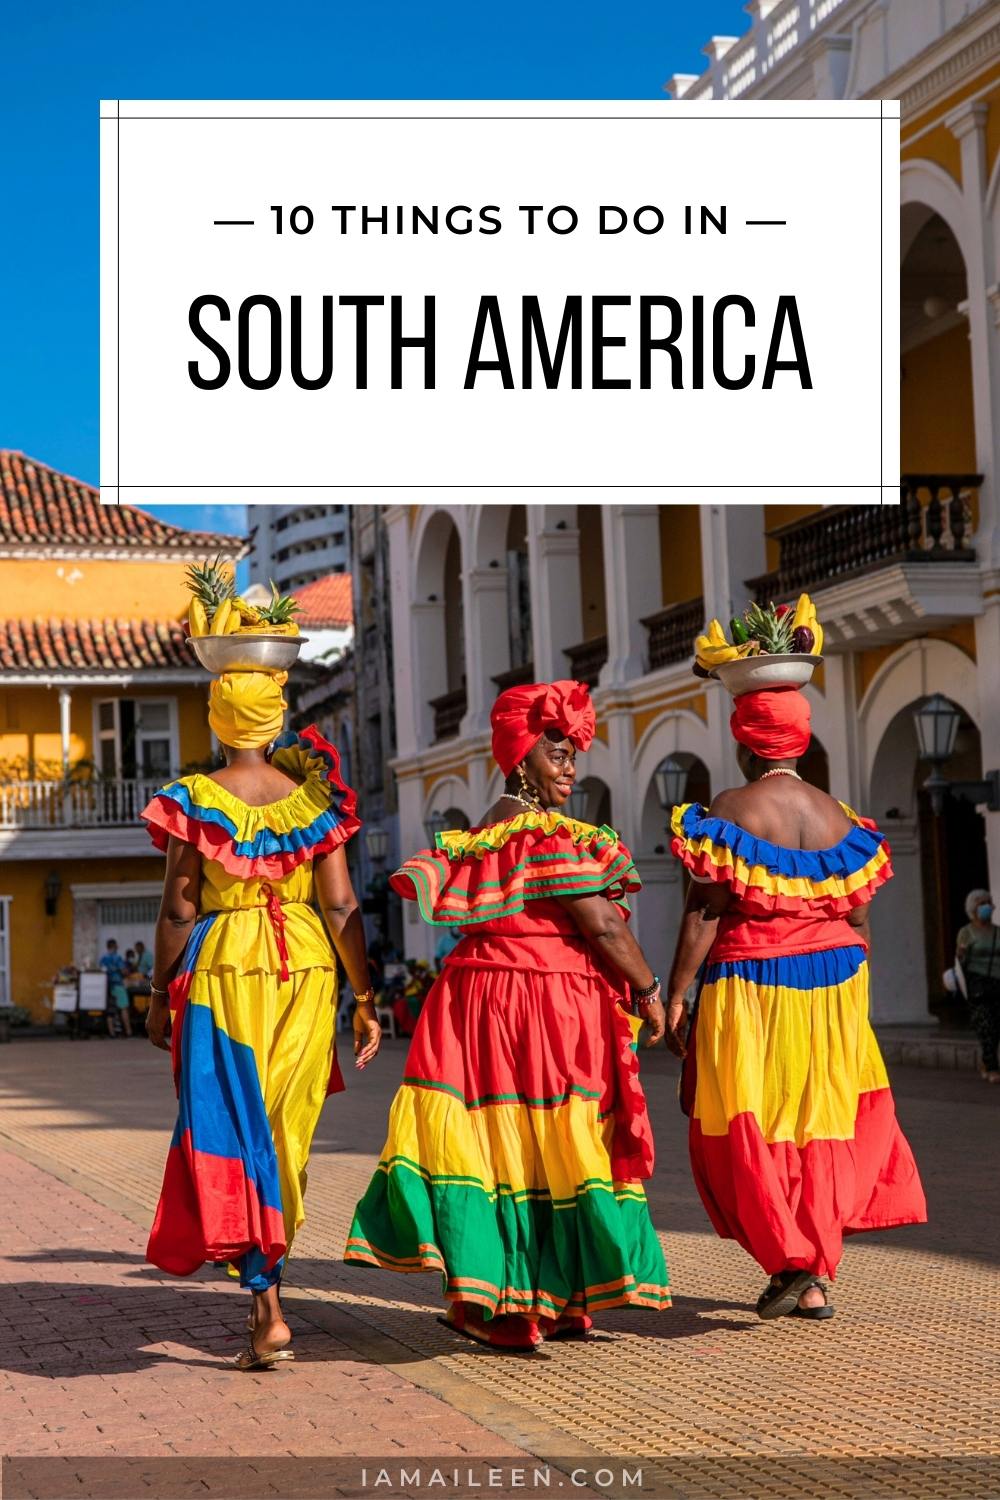 Top 10 Things to Do on a Trip to South America